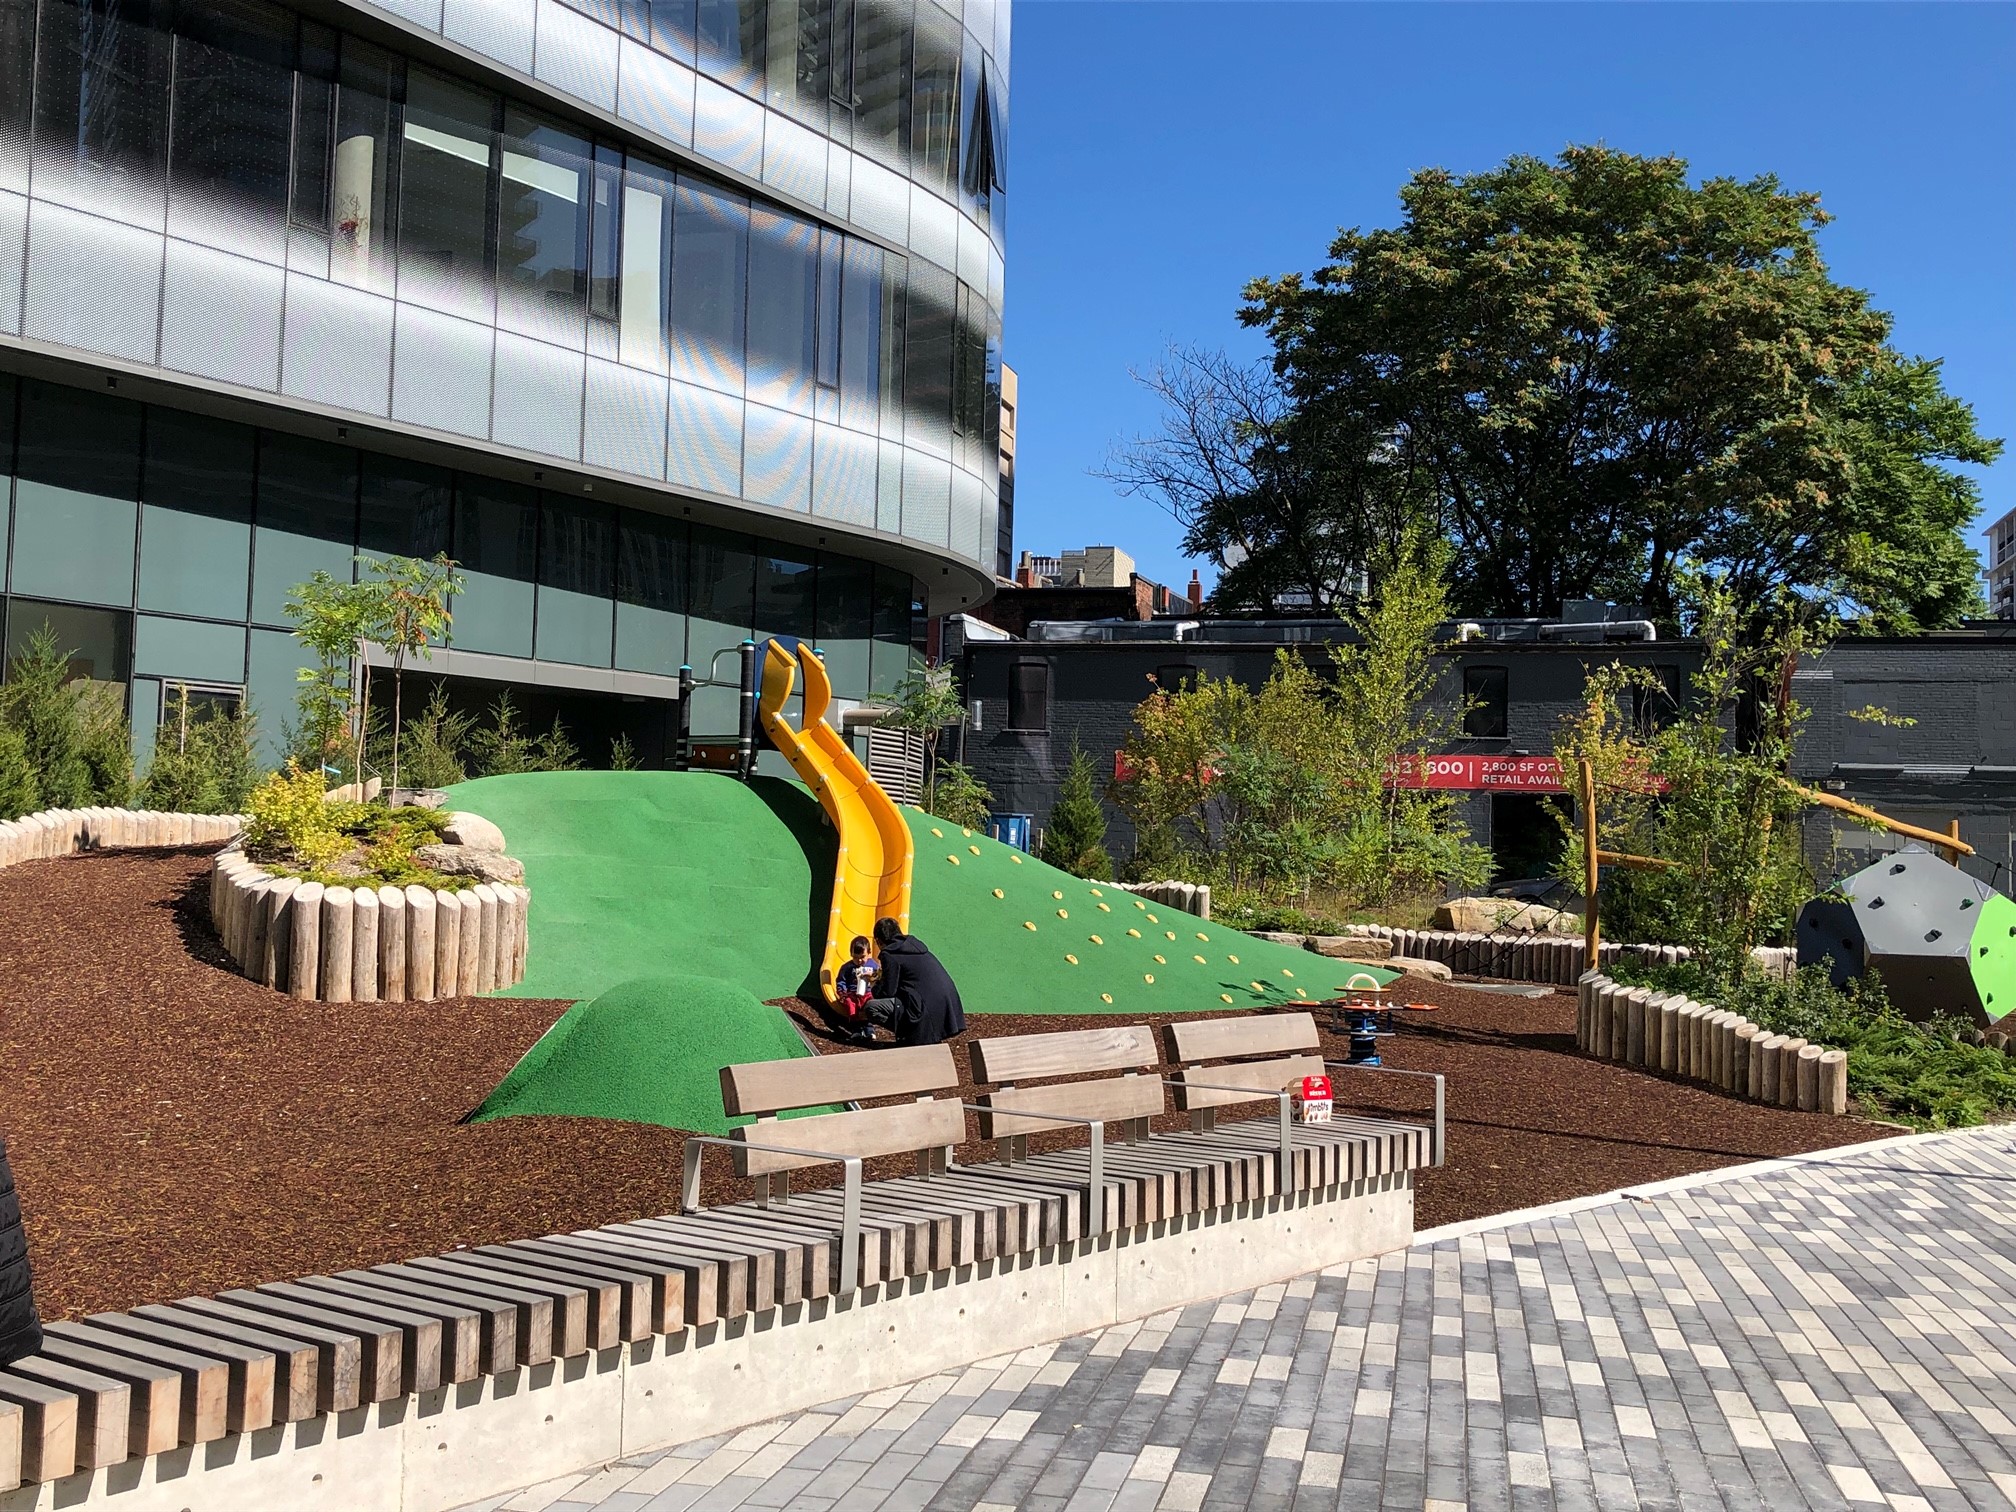 A photograph of the playground in Dr. Lillian McGregor Park which shows a yellow slide along a painted green rubber slope with climbing options. A long bench is in the foreground.